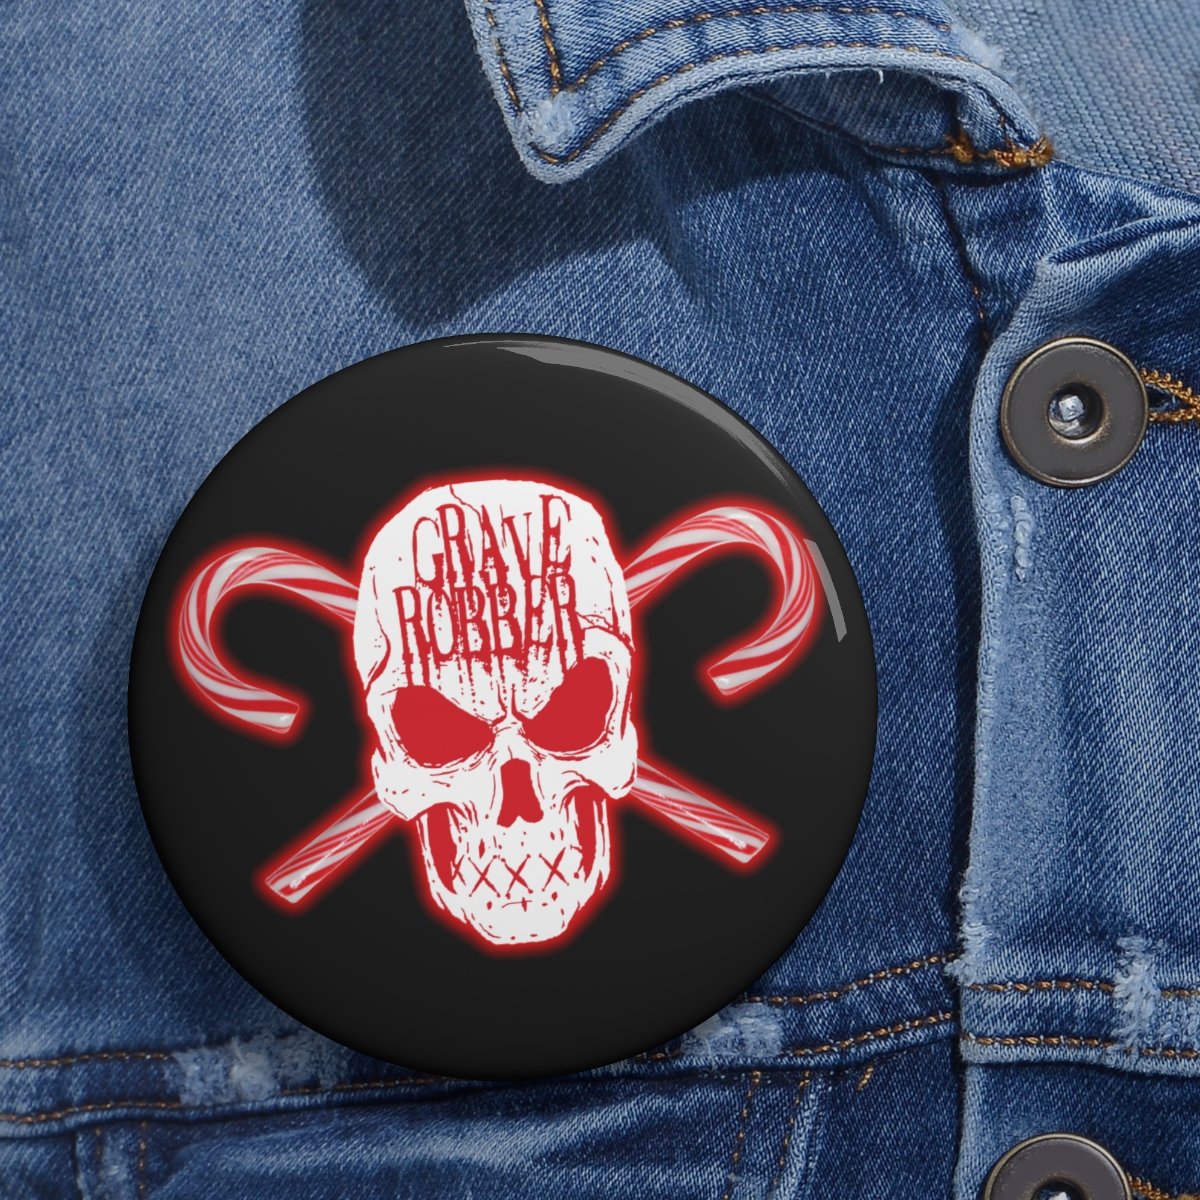 Grave Robber Skull and Crosscanes Pin Buttons